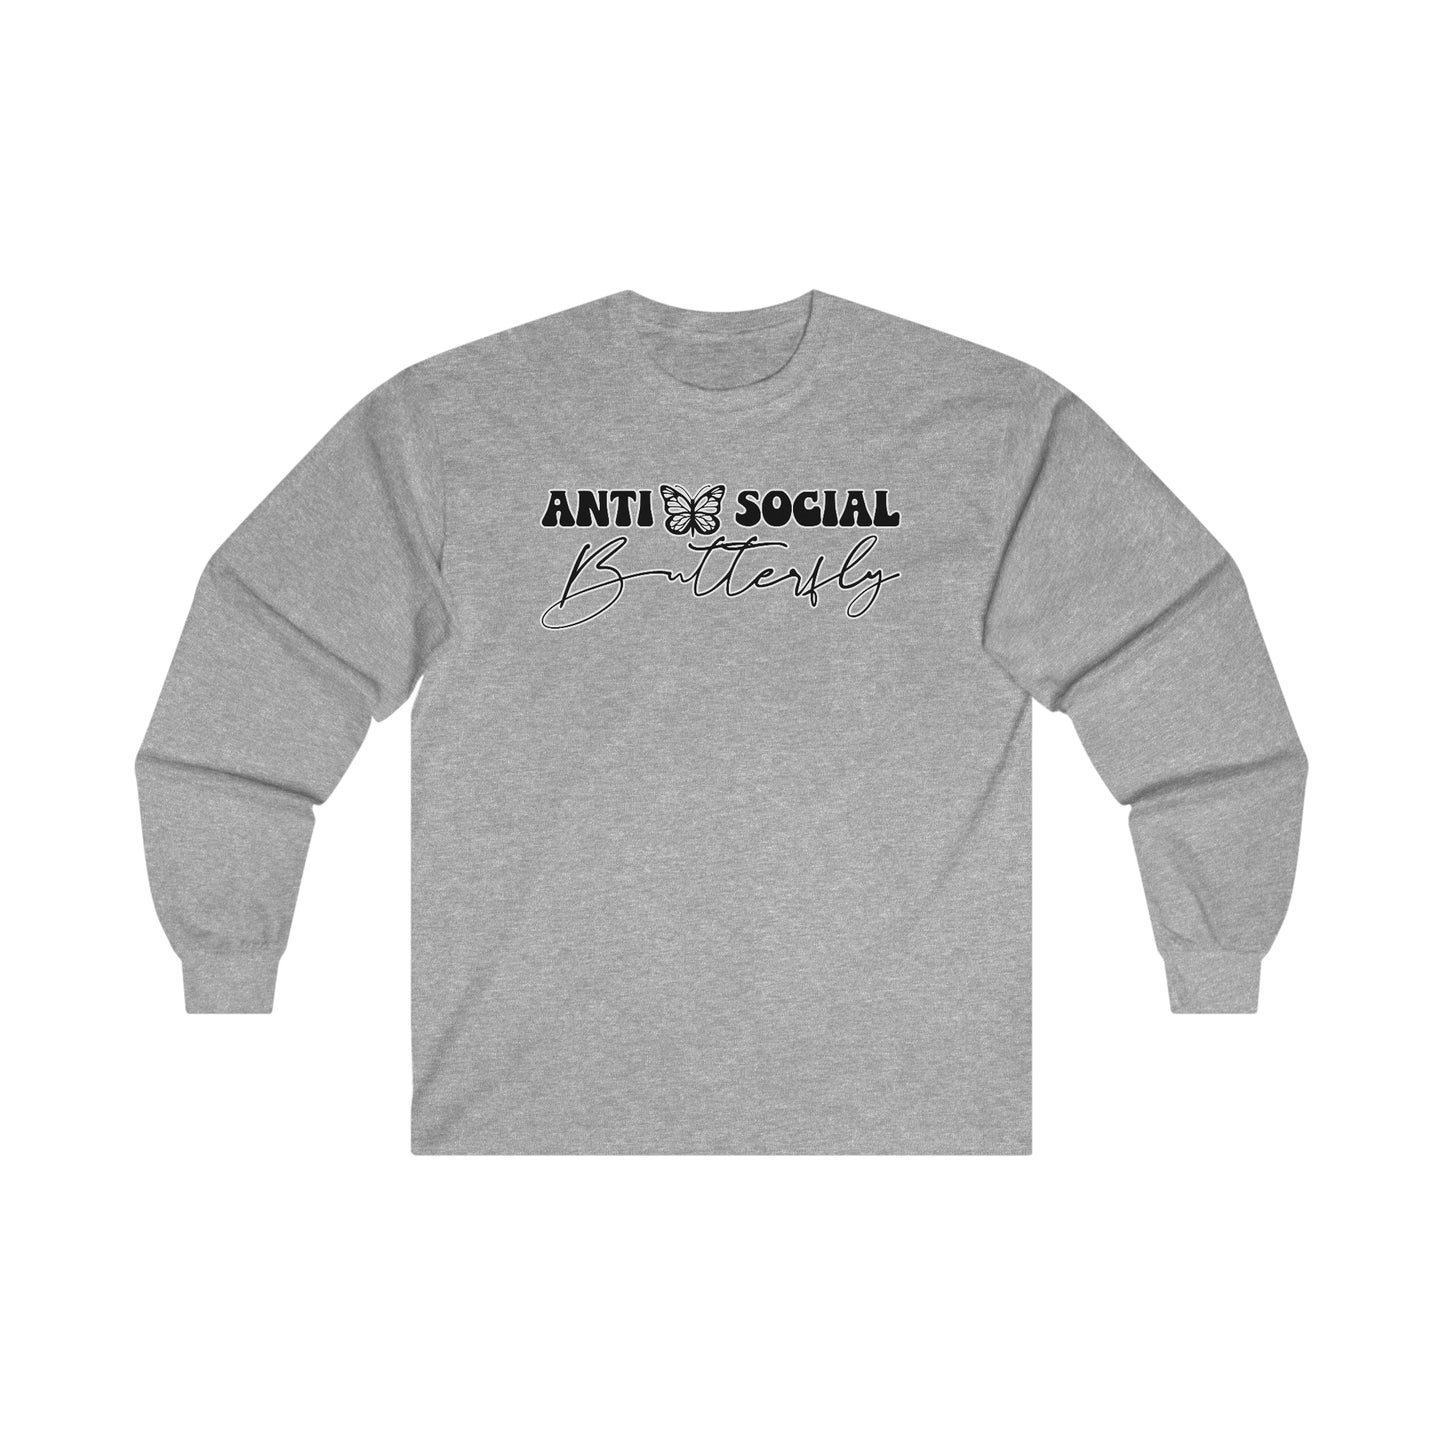 Antisocial Butterfly: Ultra Cotton Long Sleeve Tee